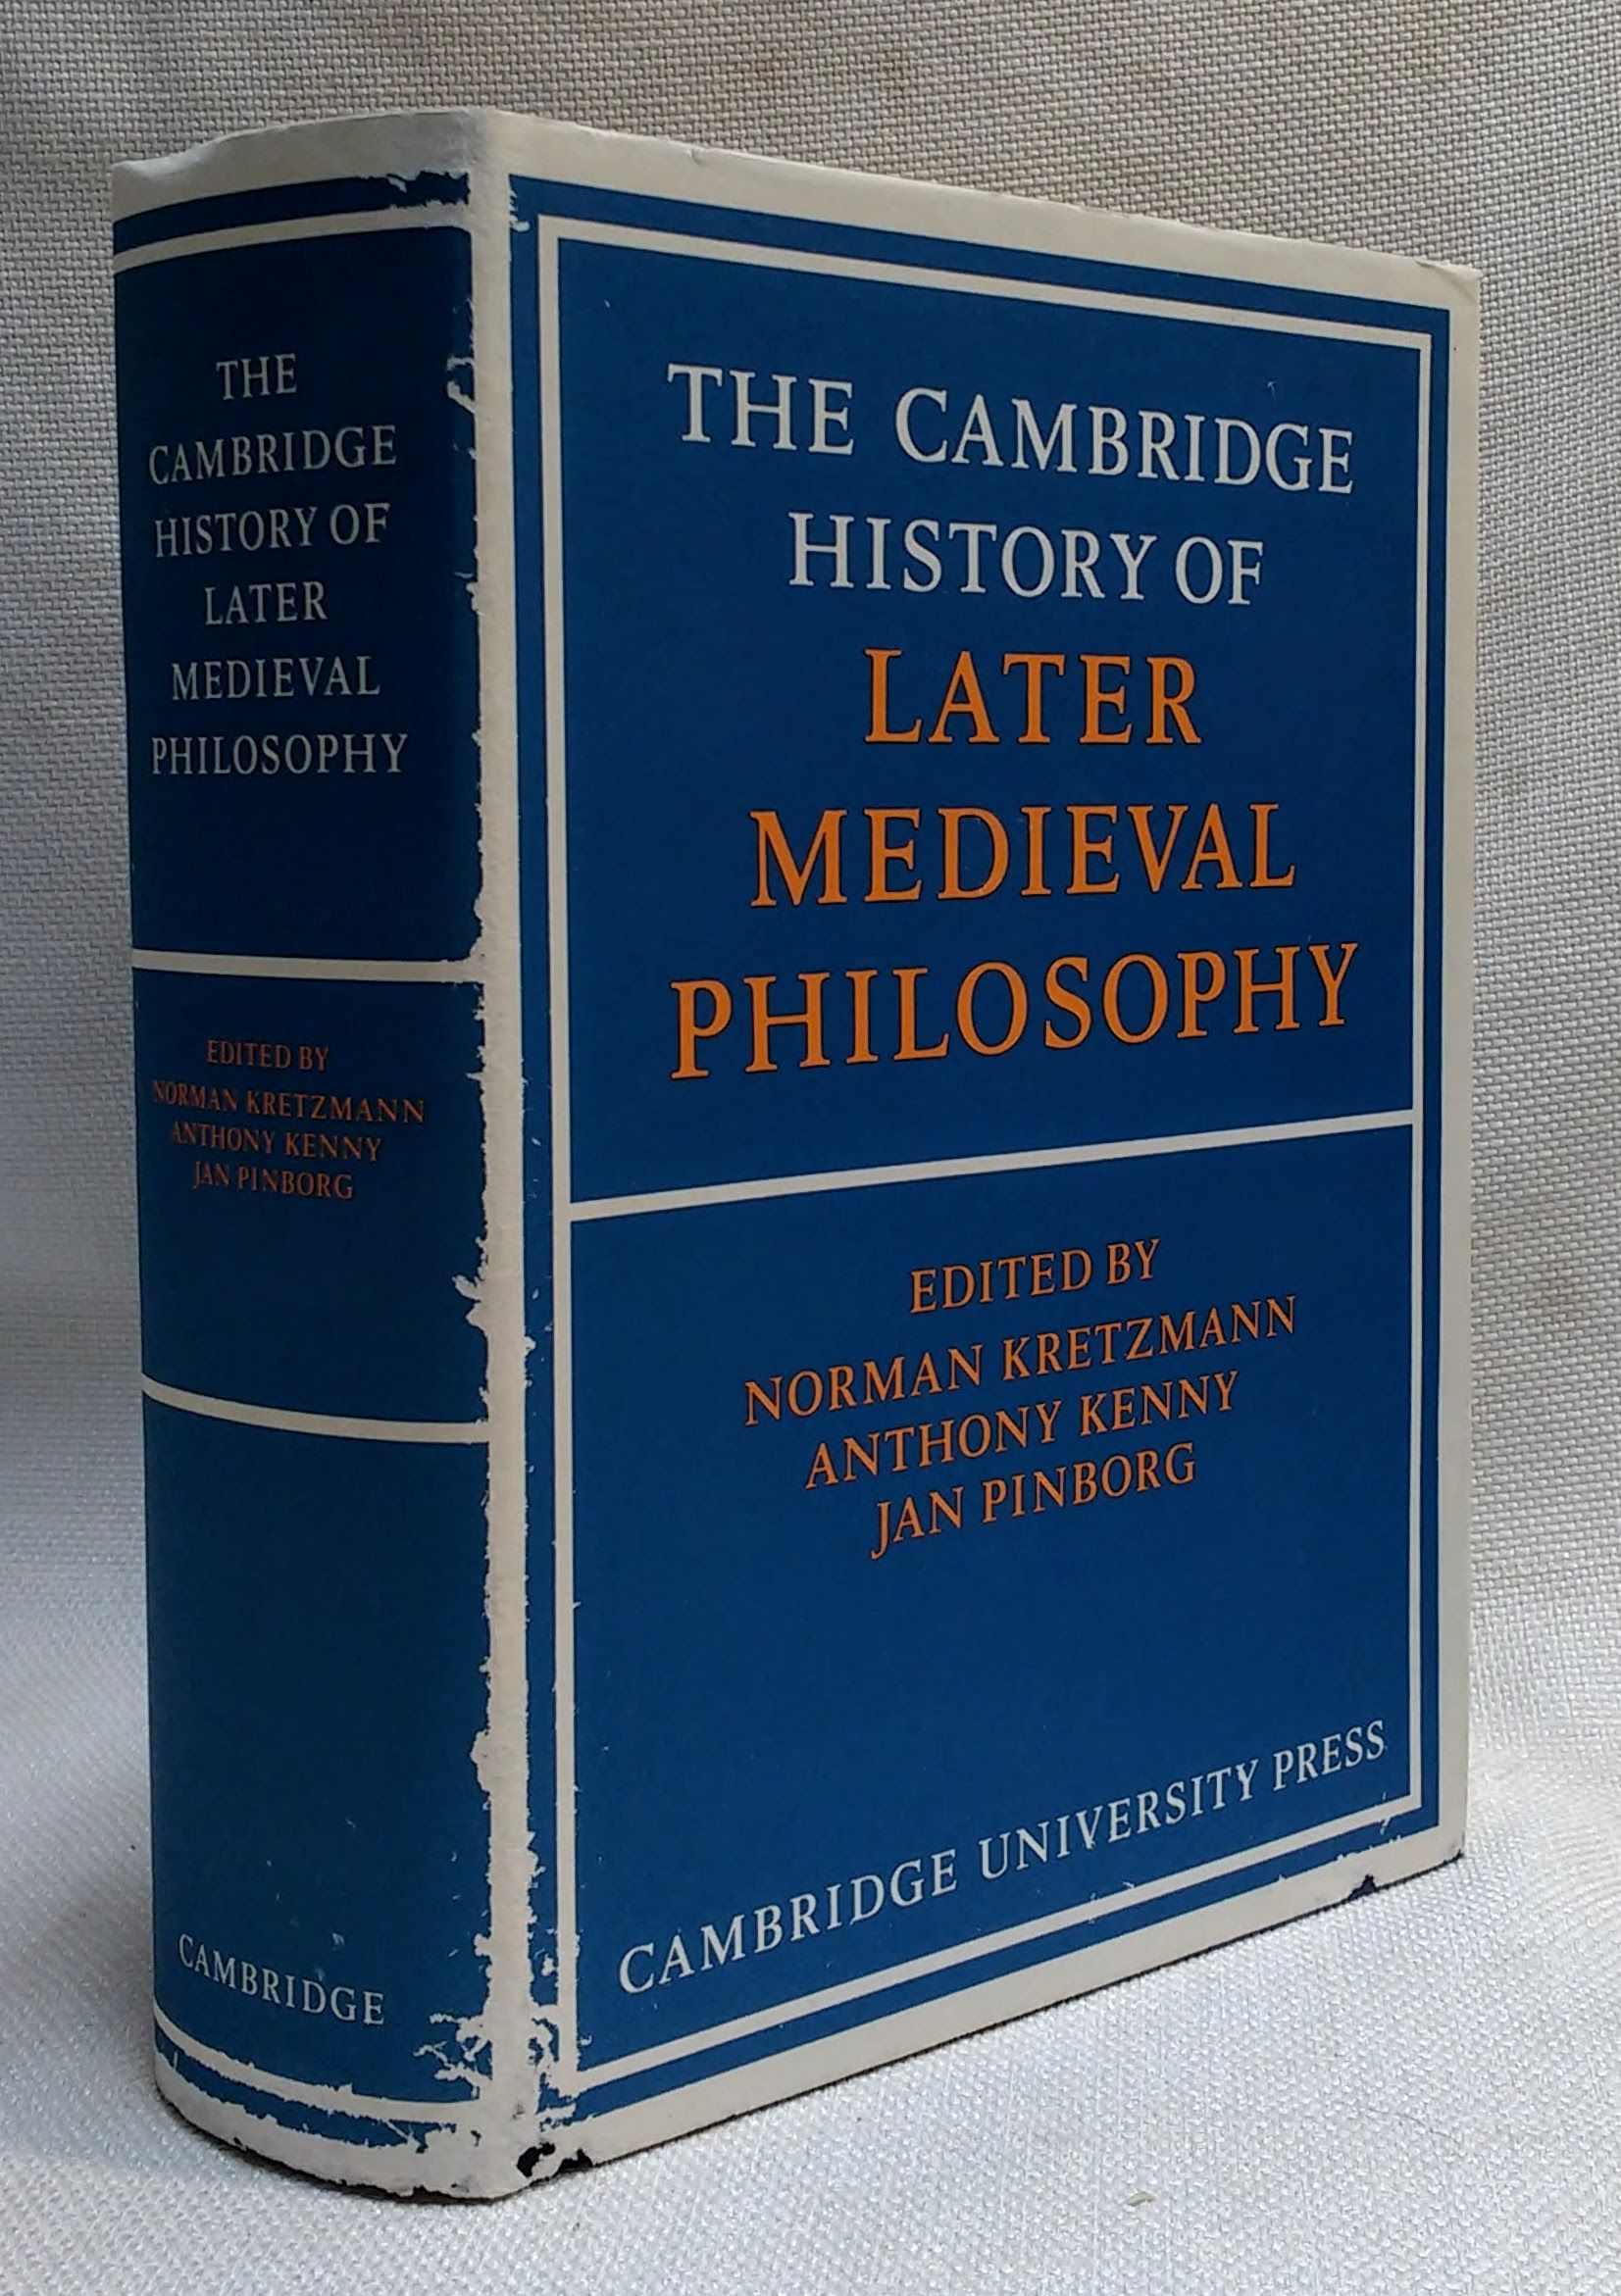 The Cambridge History of Later Medieval Philosophy: From the Rediscovery of Aristotle to the Disintegration of Scholasticism, 1100?1600 - Kretzmann, Norman [Editor]; Kenny, Anthony [Editor]; Pinborg, Jan [Editor]; Stump, Eleonore [Editor];